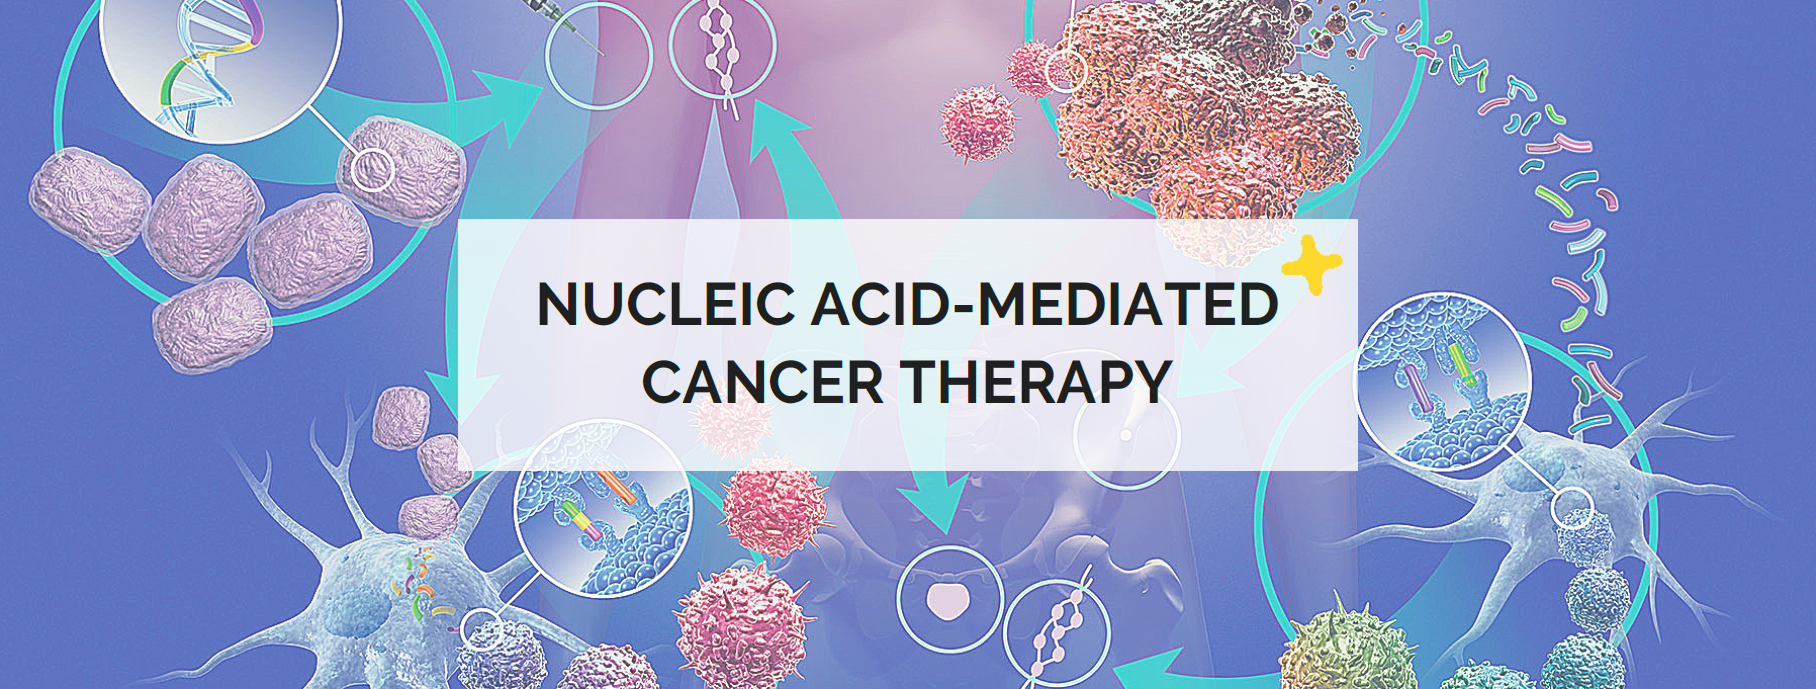 Nucleic acid-mediated cancer therapy